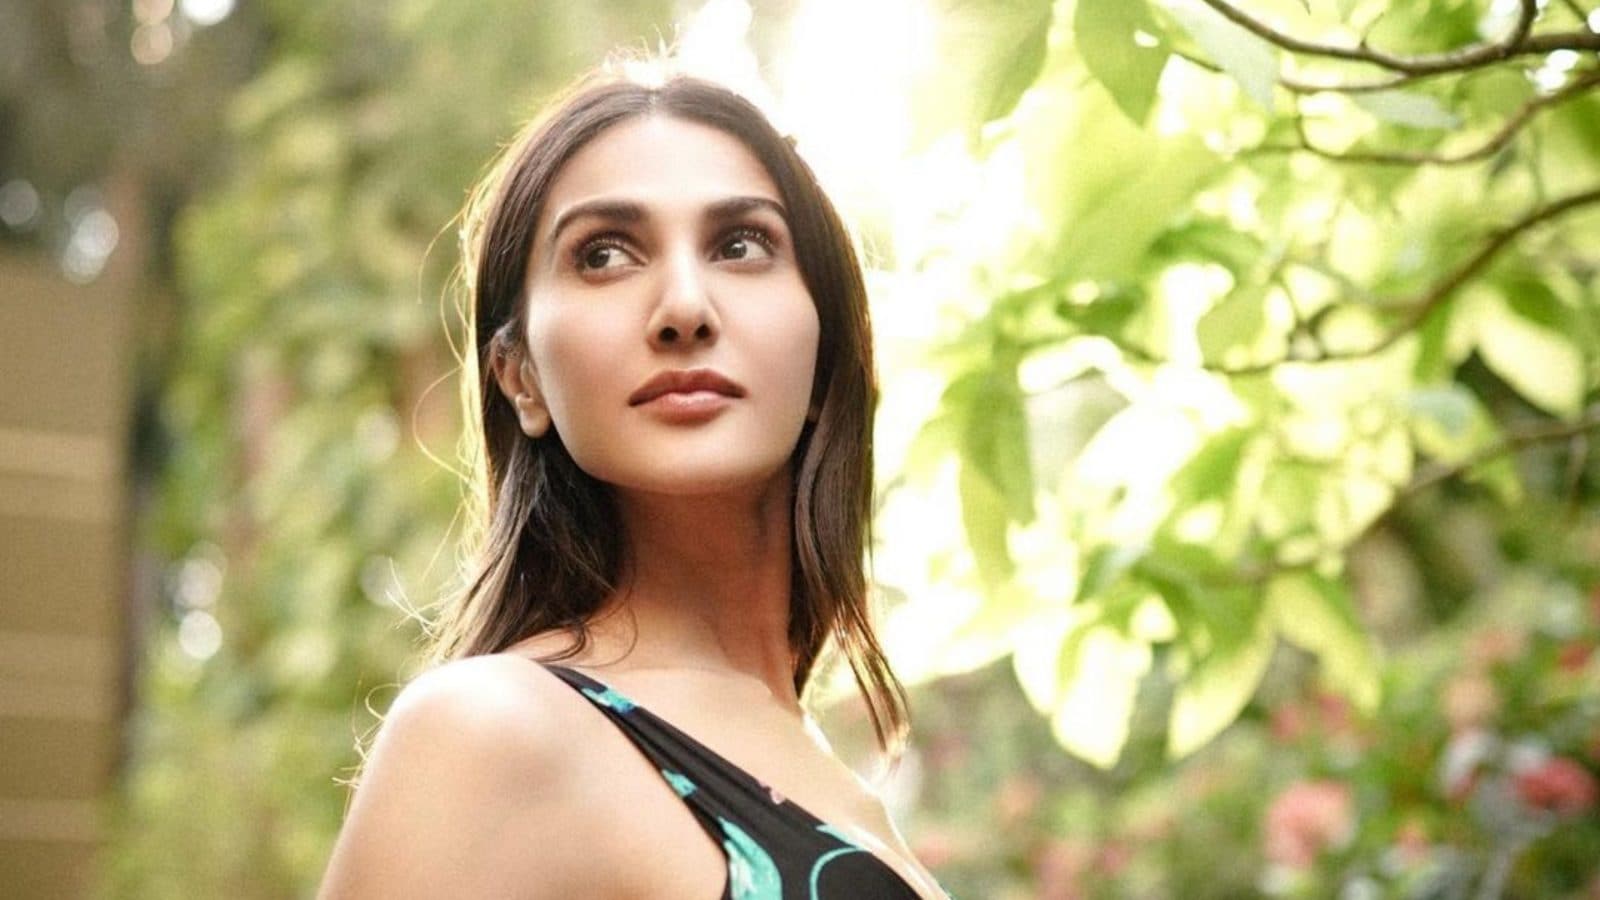 Xnxx Kareena Photo - Vaani Kapoor To Play a Porn Star Look-Alike In Her Upcoming Movie? Here's  What We Know - News18